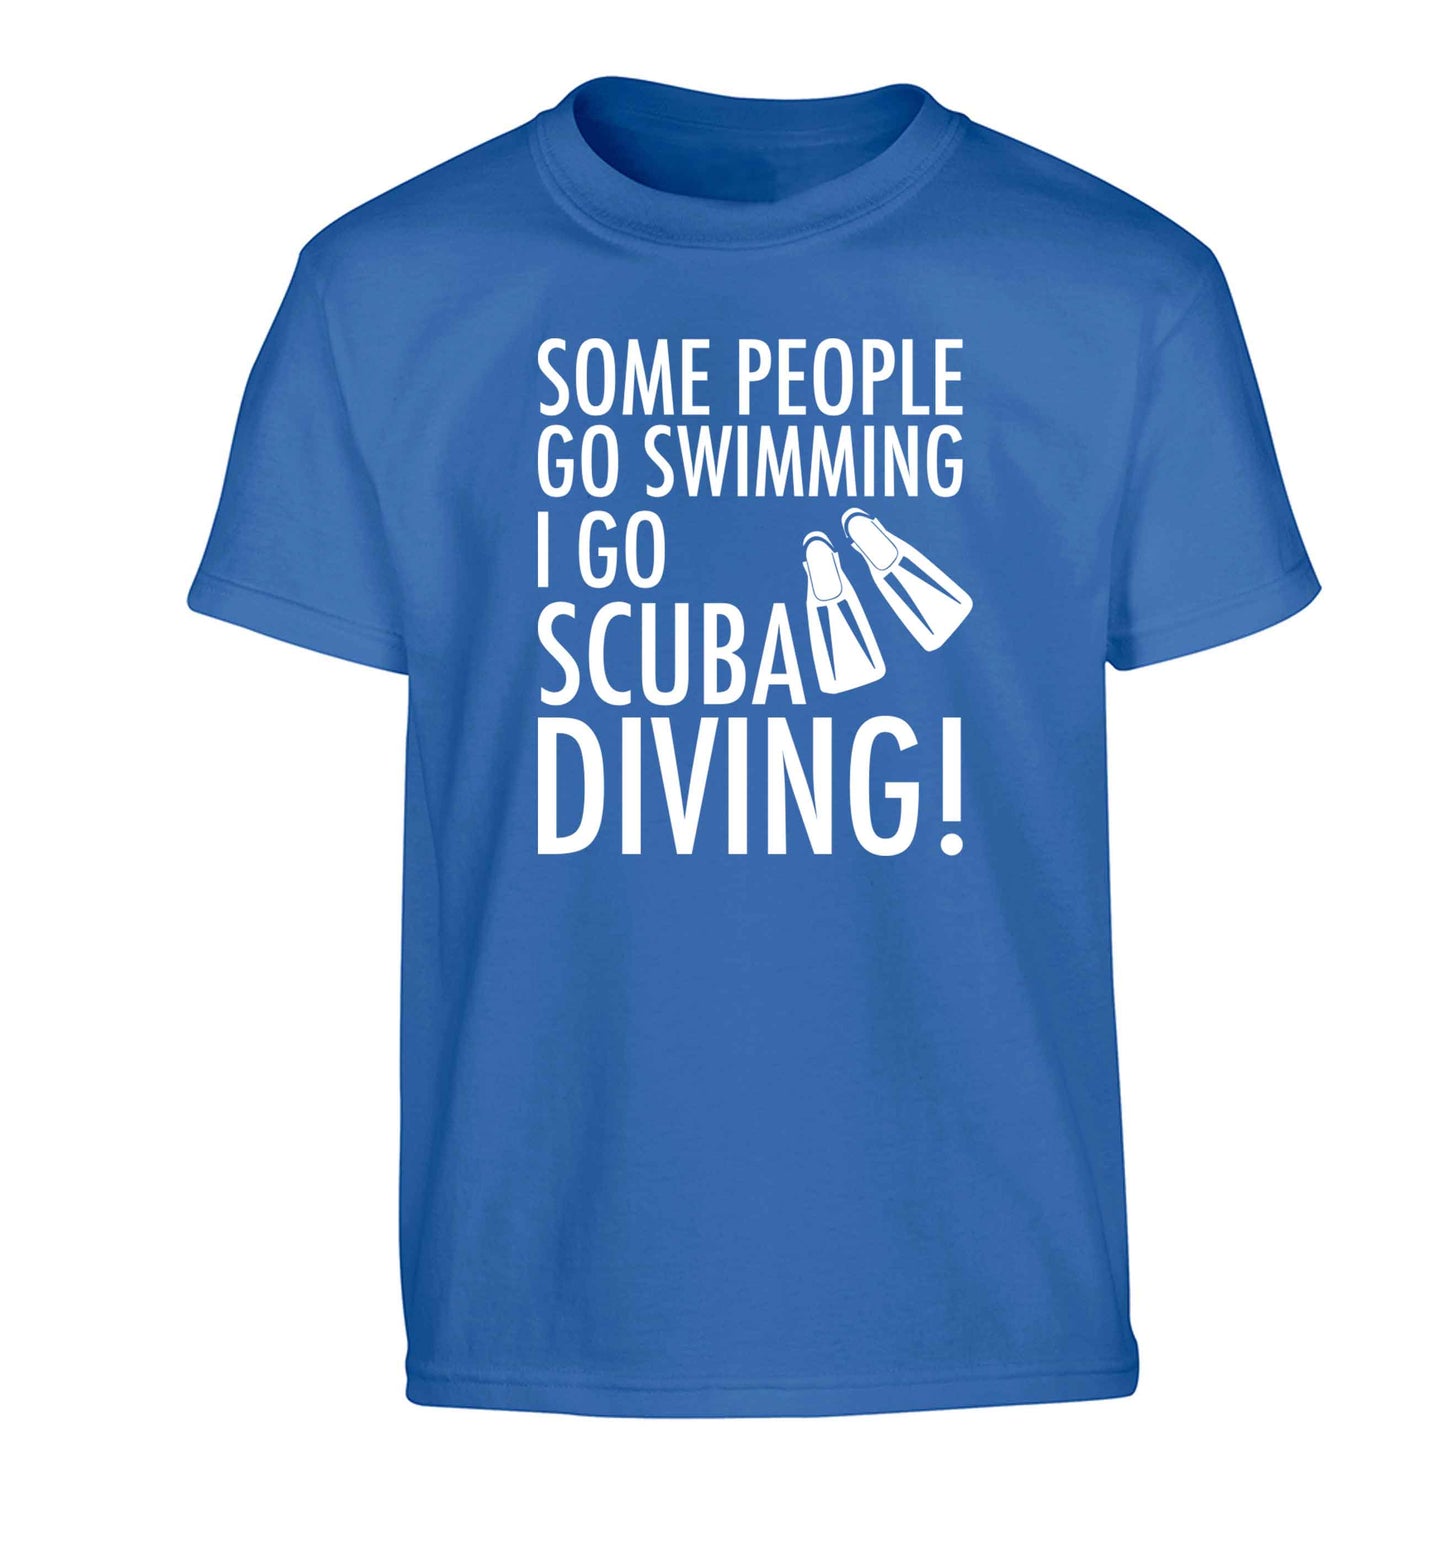 Some people go swimming I go scuba diving! Children's blue Tshirt 12-13 Years